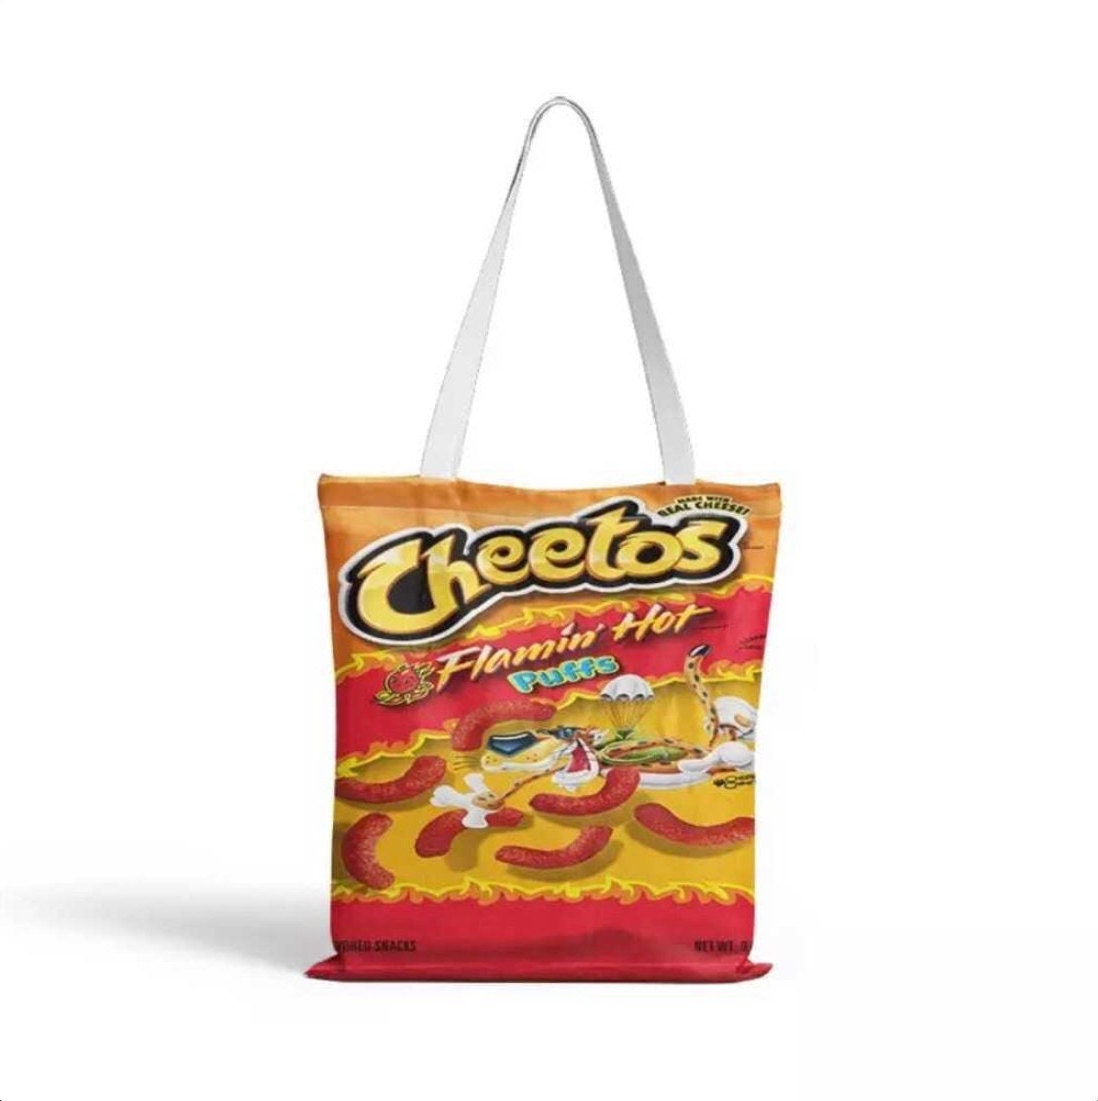 Fantastix Recycled Bag, Coin Bag/ Chili Cheese Cheetos, Coin Purse, Change  Bag, Card Holder, Holiday Gifts, Birthday Gifts, Gift Card Holder 